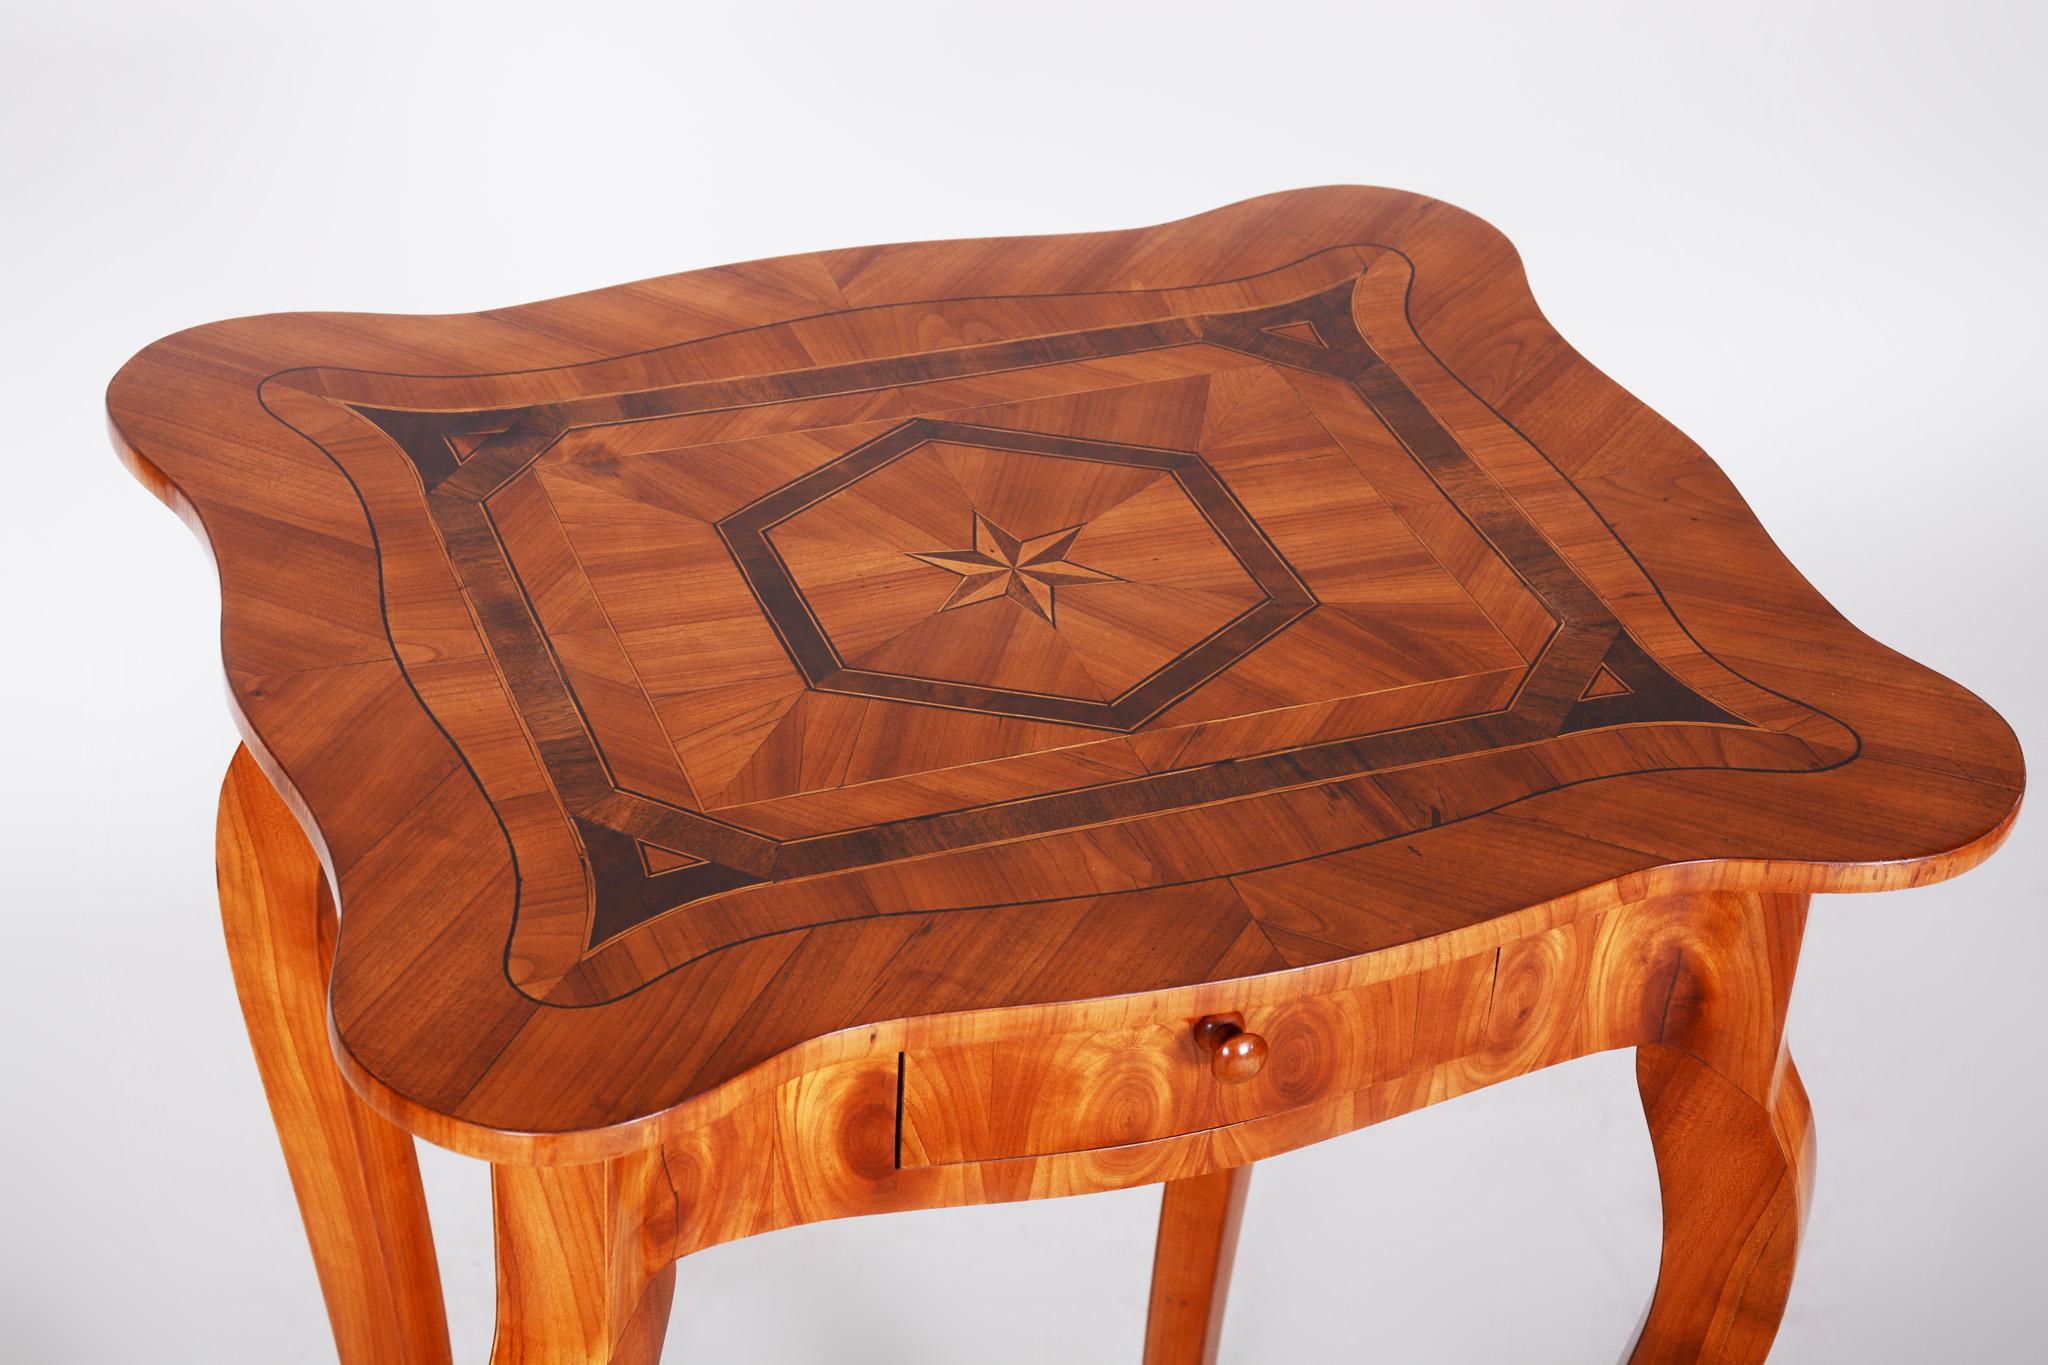 Shipping to any US port only for $290 USD

Czech classicism biedermeier small table
Period: 1780-1789
Material: Cherry tree
Shellac polished.





   